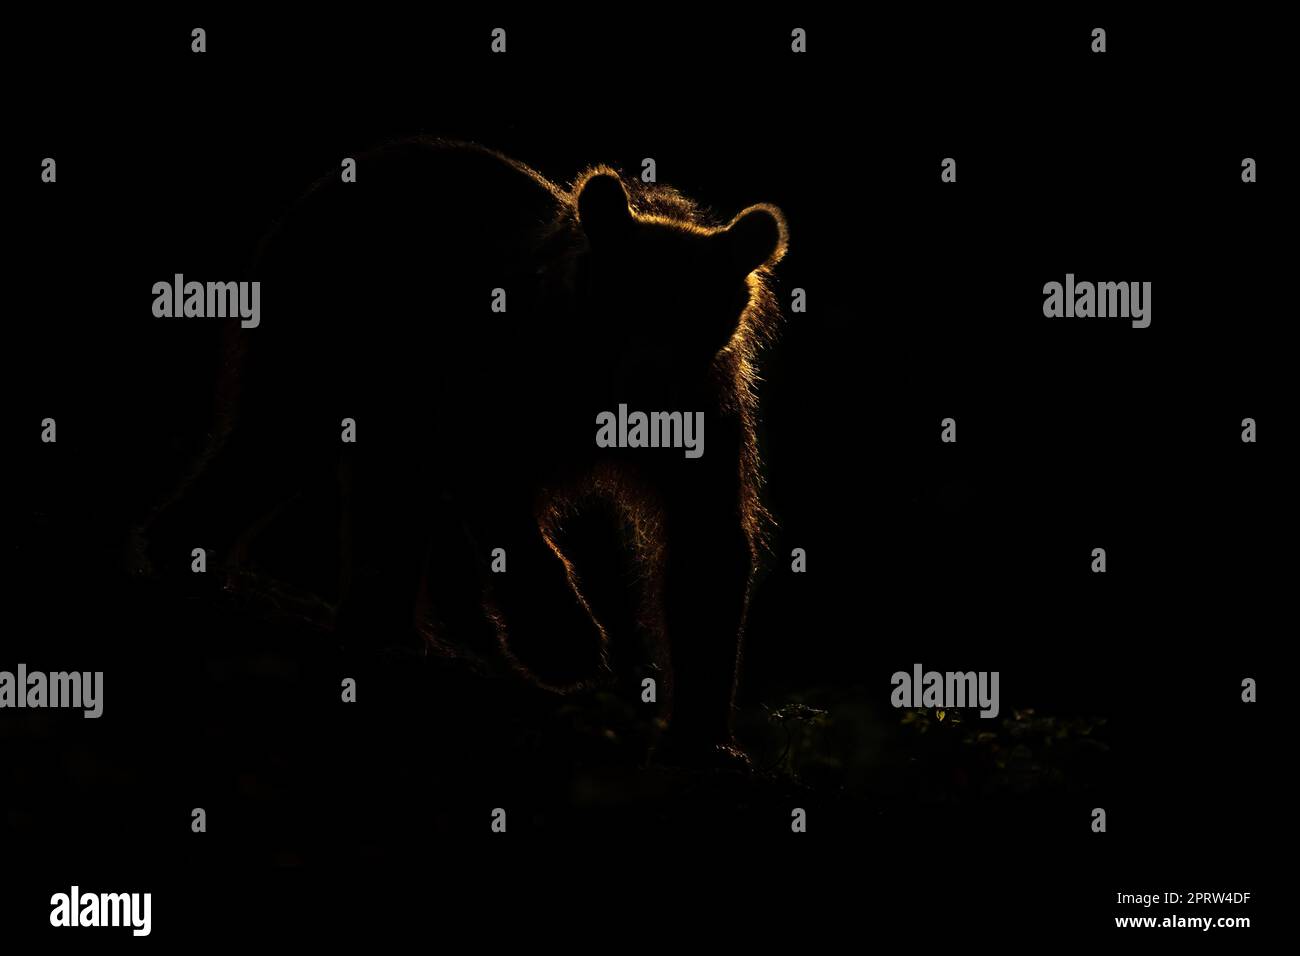 Silhouette of brown bear standing in darkness with backlit Stock Photo